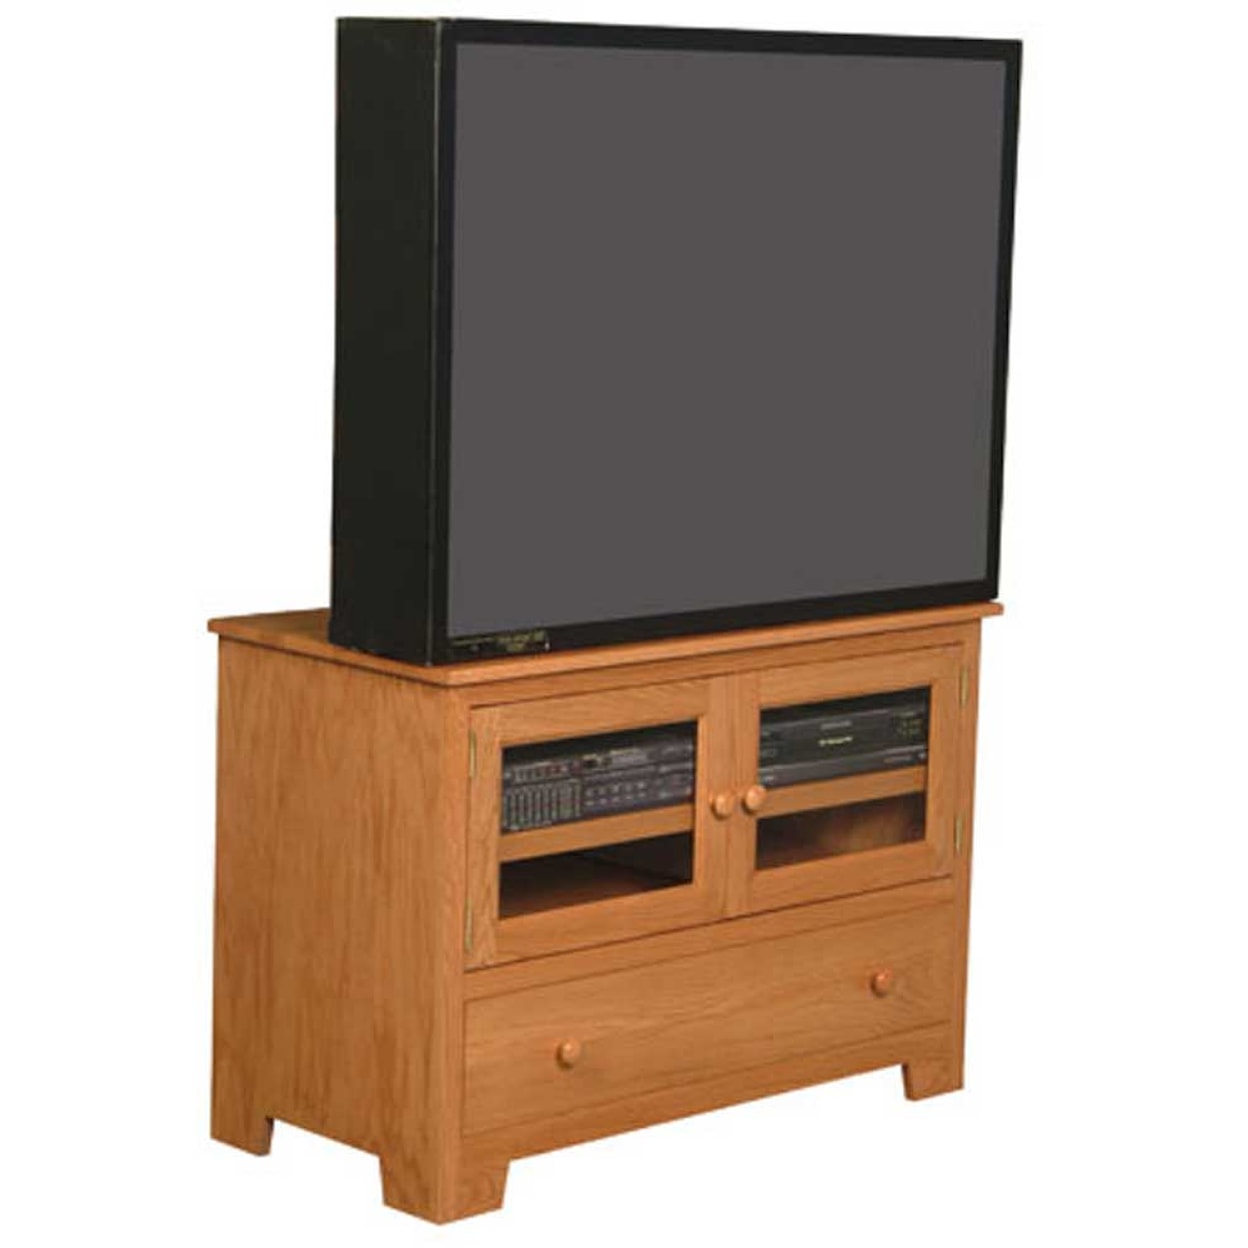 Simply Amish Shaker Amish Widescreen TV Stand